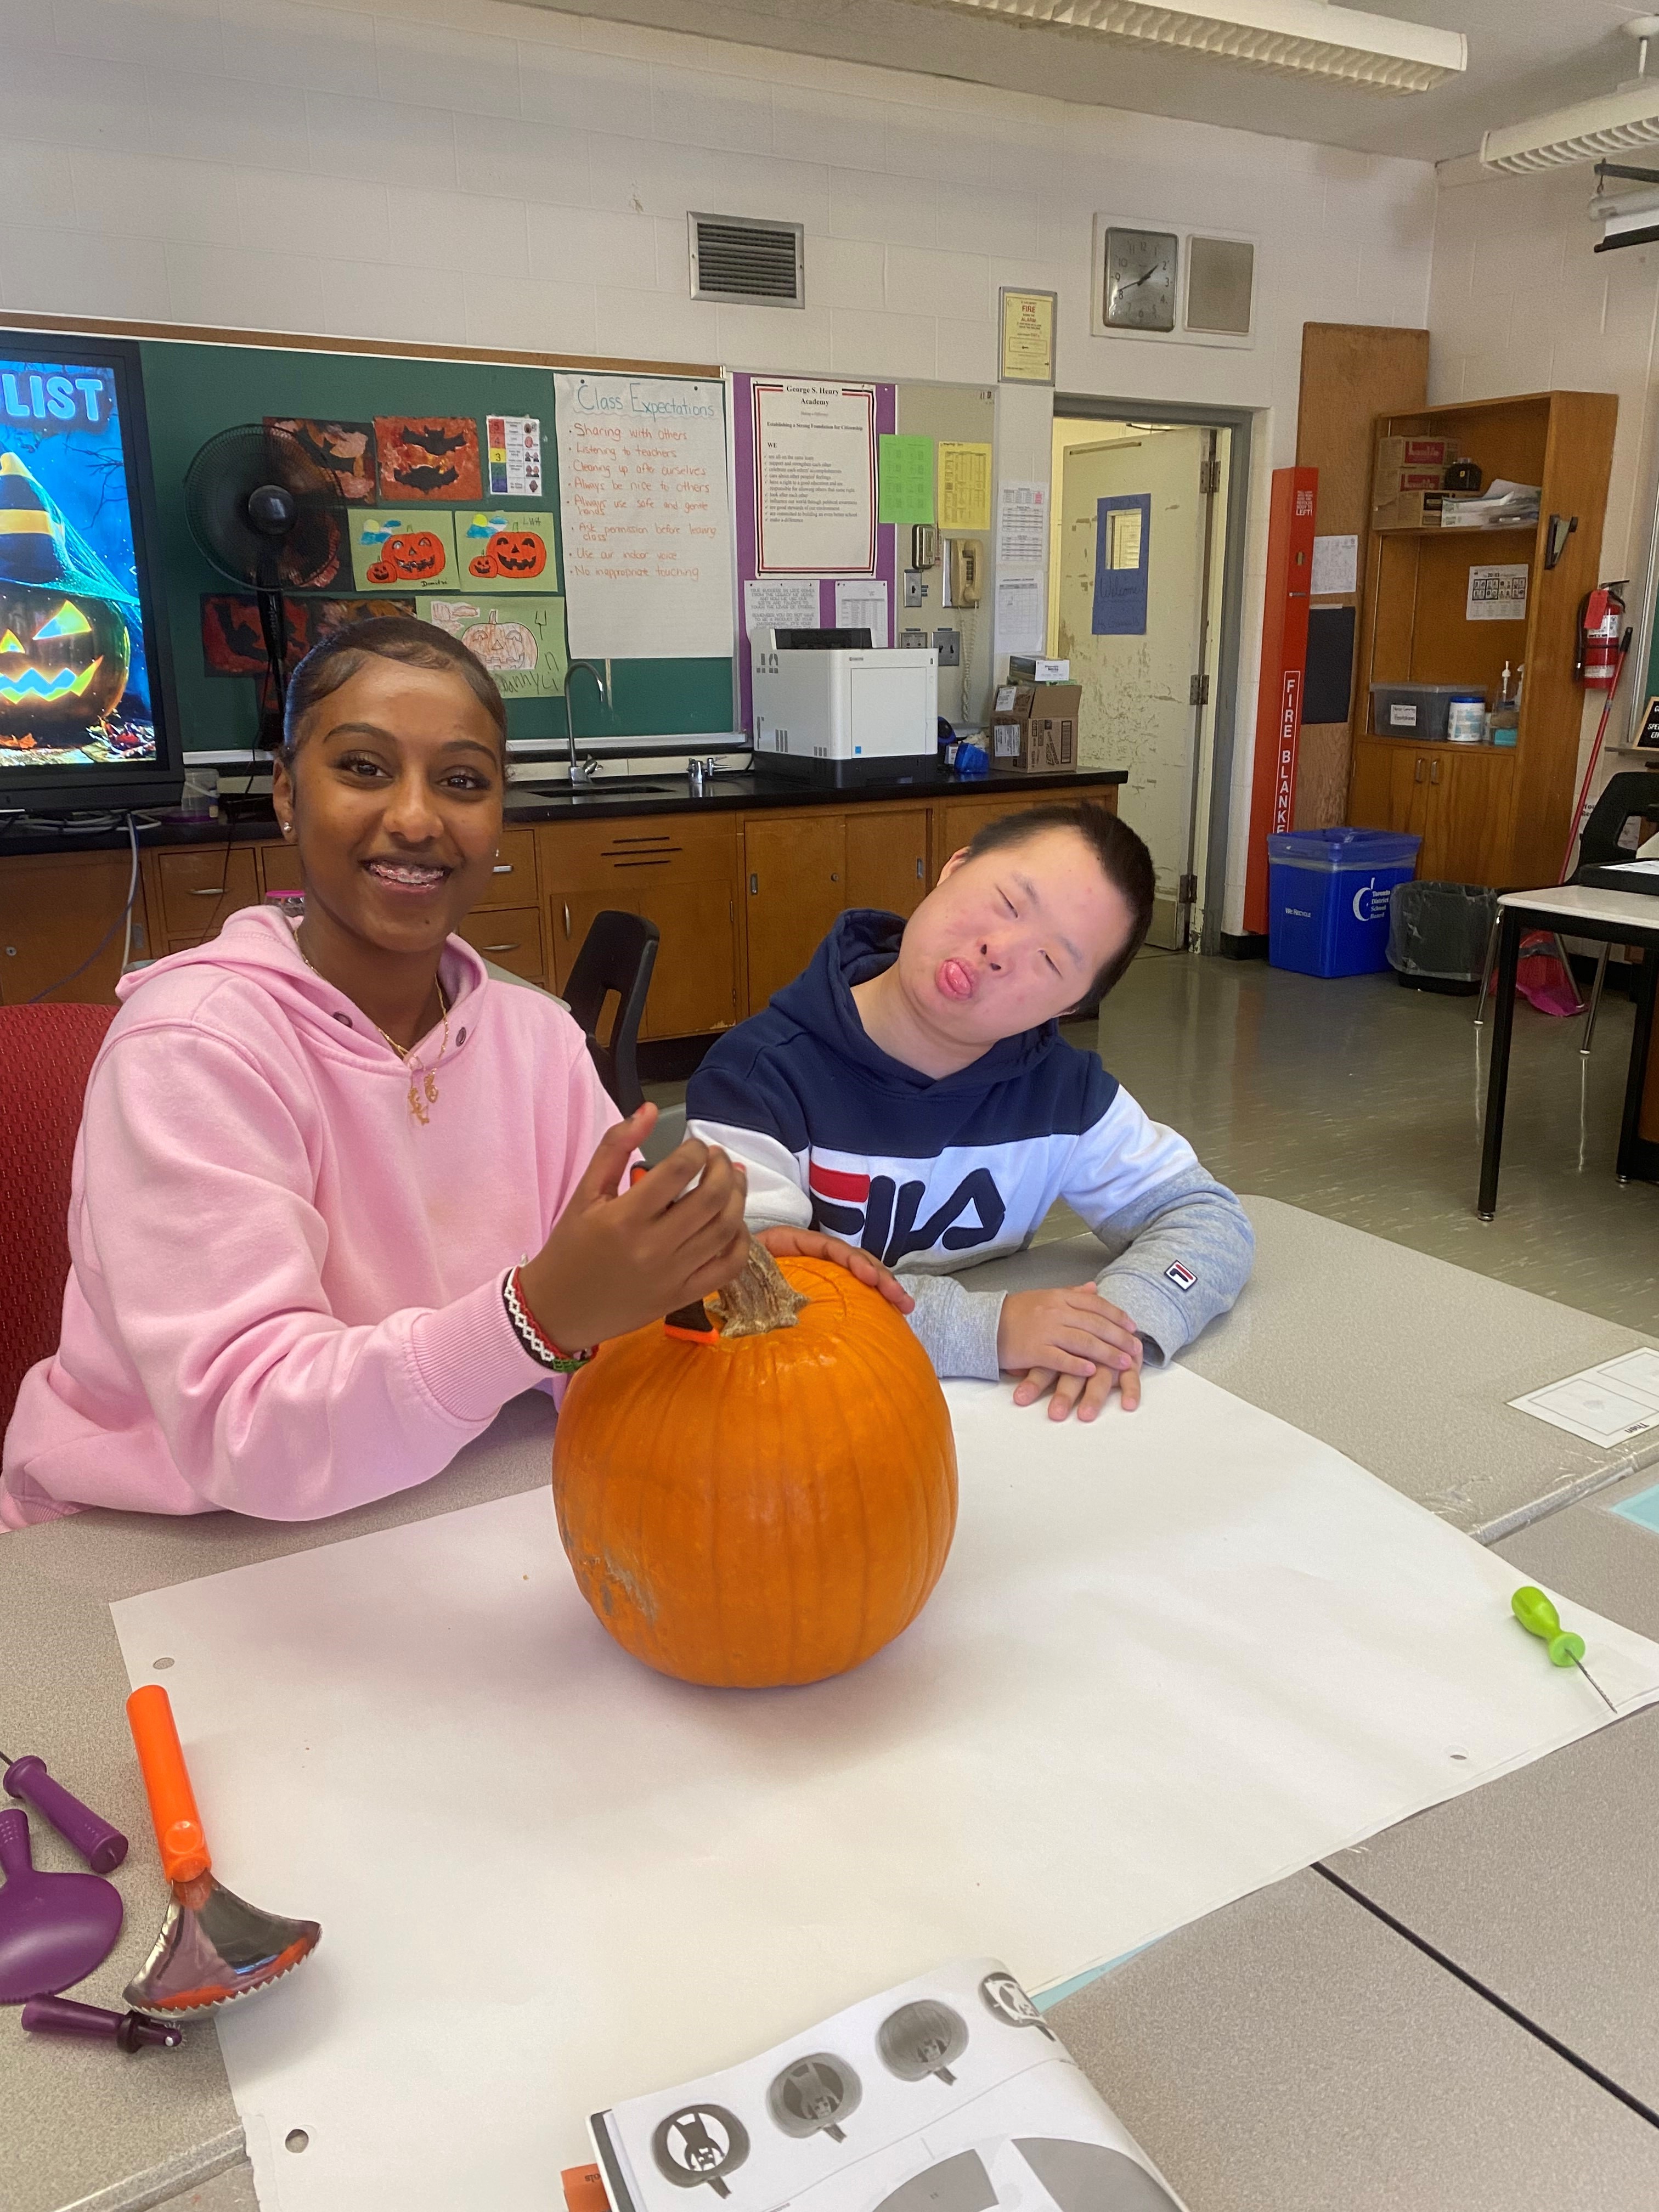 Pumpkin Carving with the Leadership Class Open Gallery